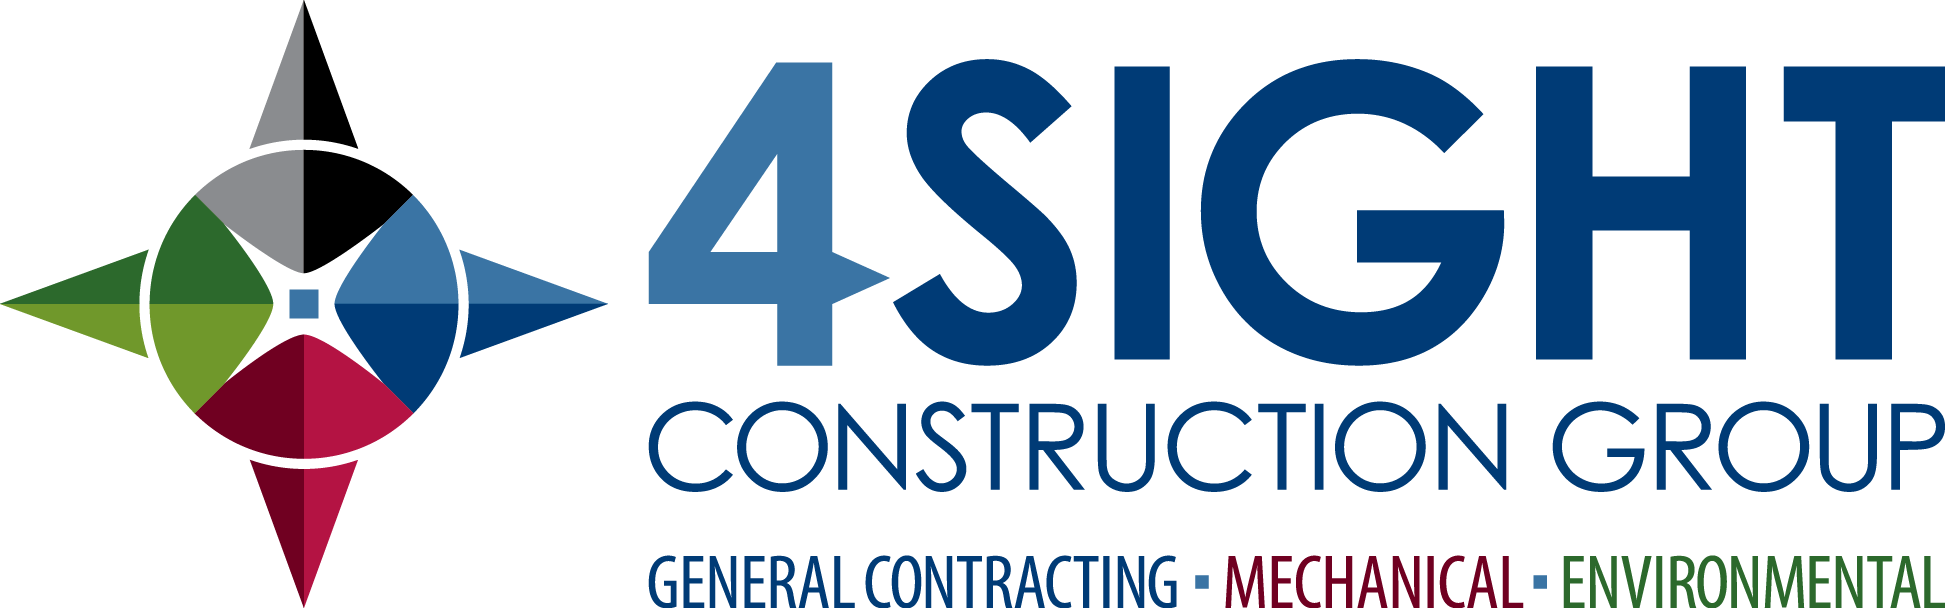 4 Sight Construction Group - 4 Sight (1945x608), Png Download